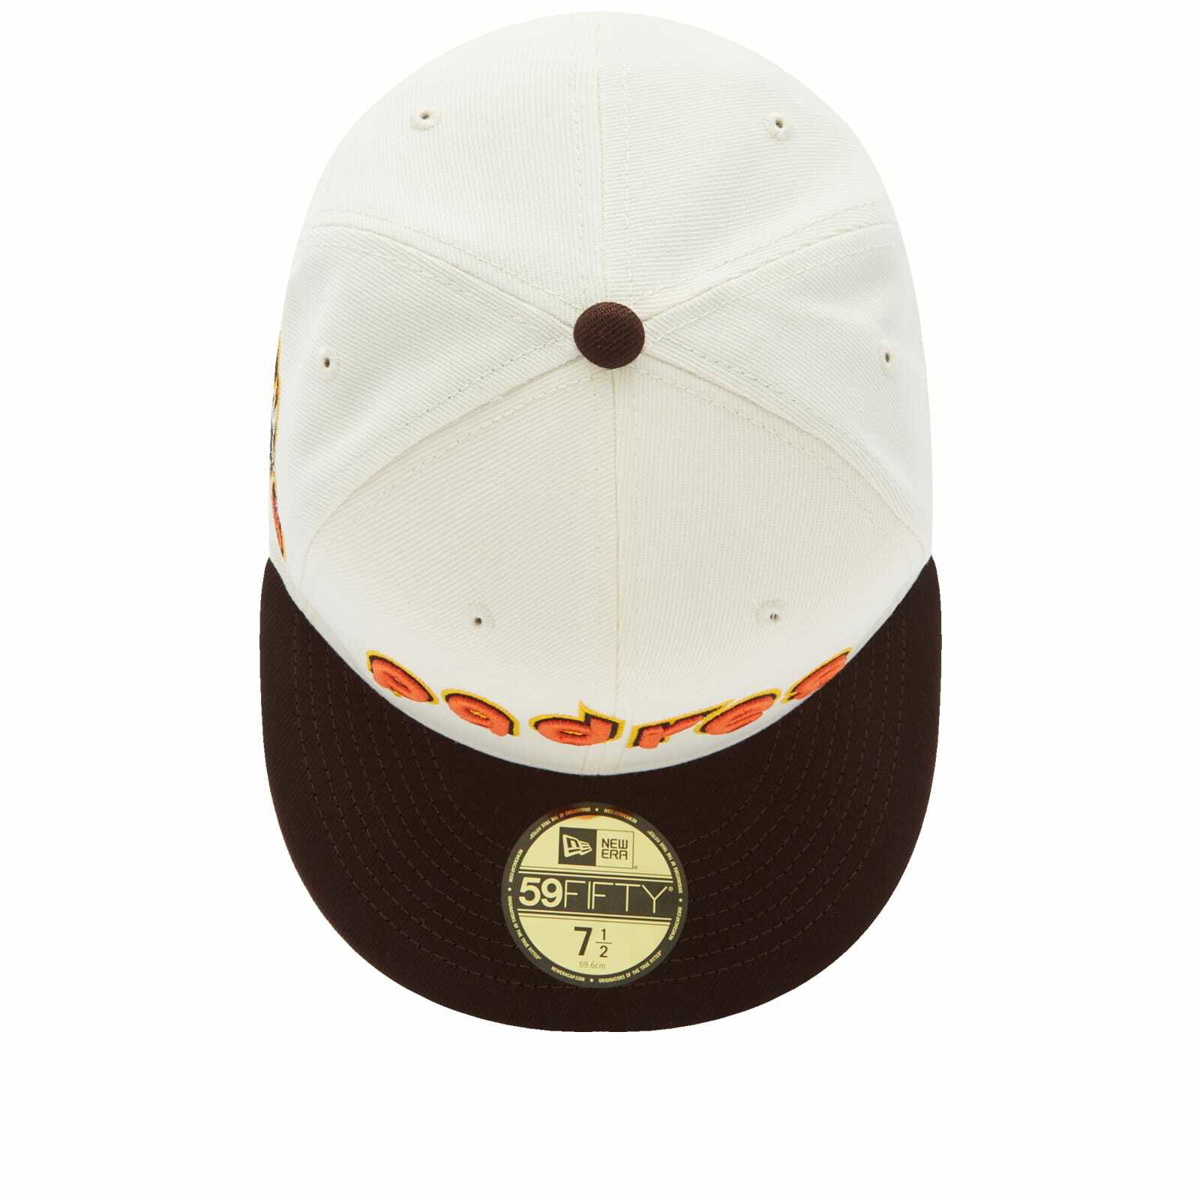 Chicago White Sox Retro Jersey Script Off White 59FIFTY Fitted Cap